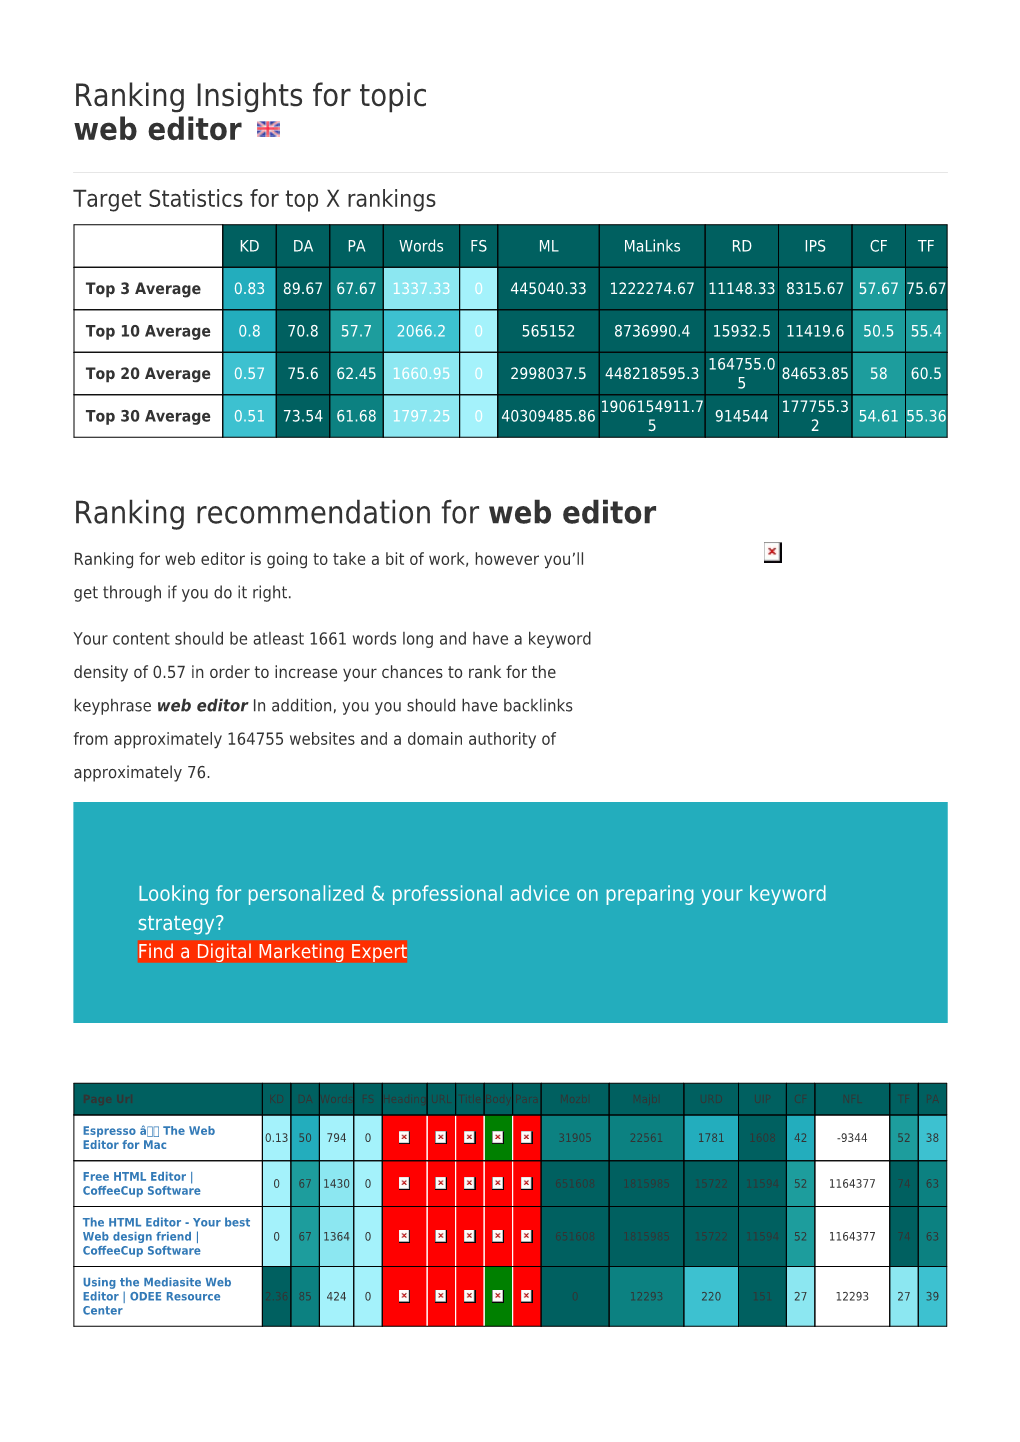 Ranking Insights for Topic Web Editor